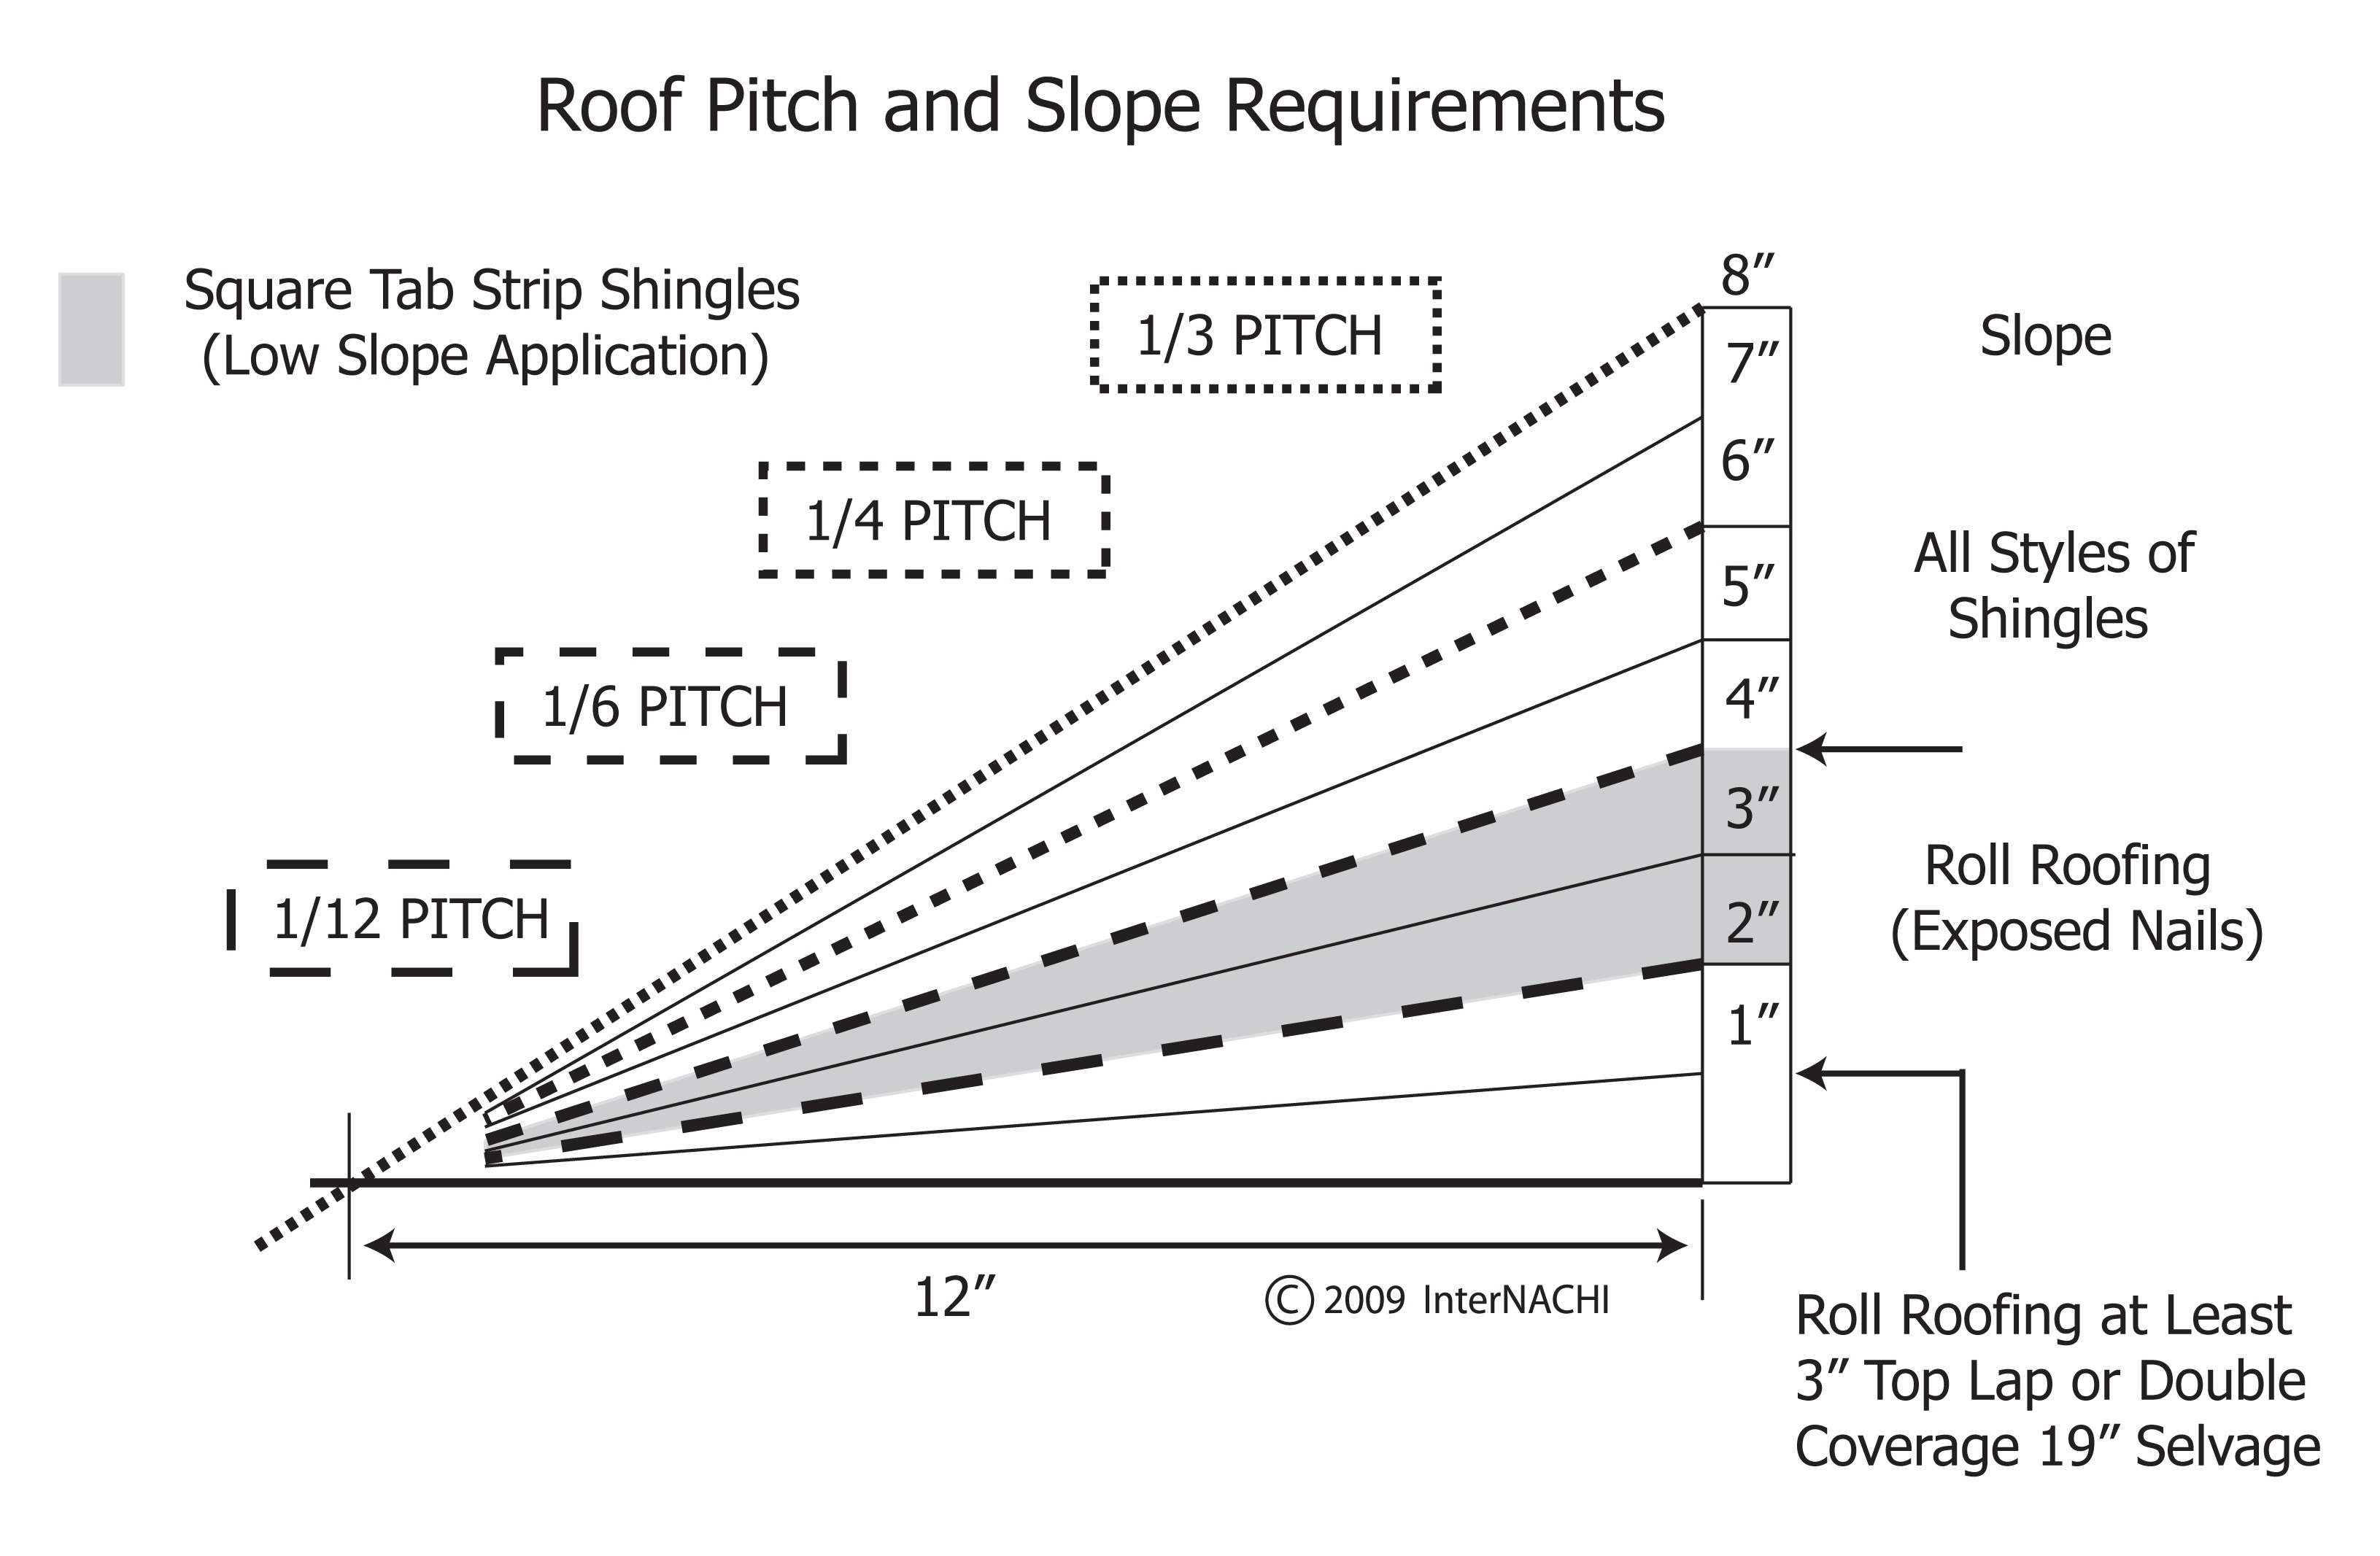 Roof pitch and slope requirements.